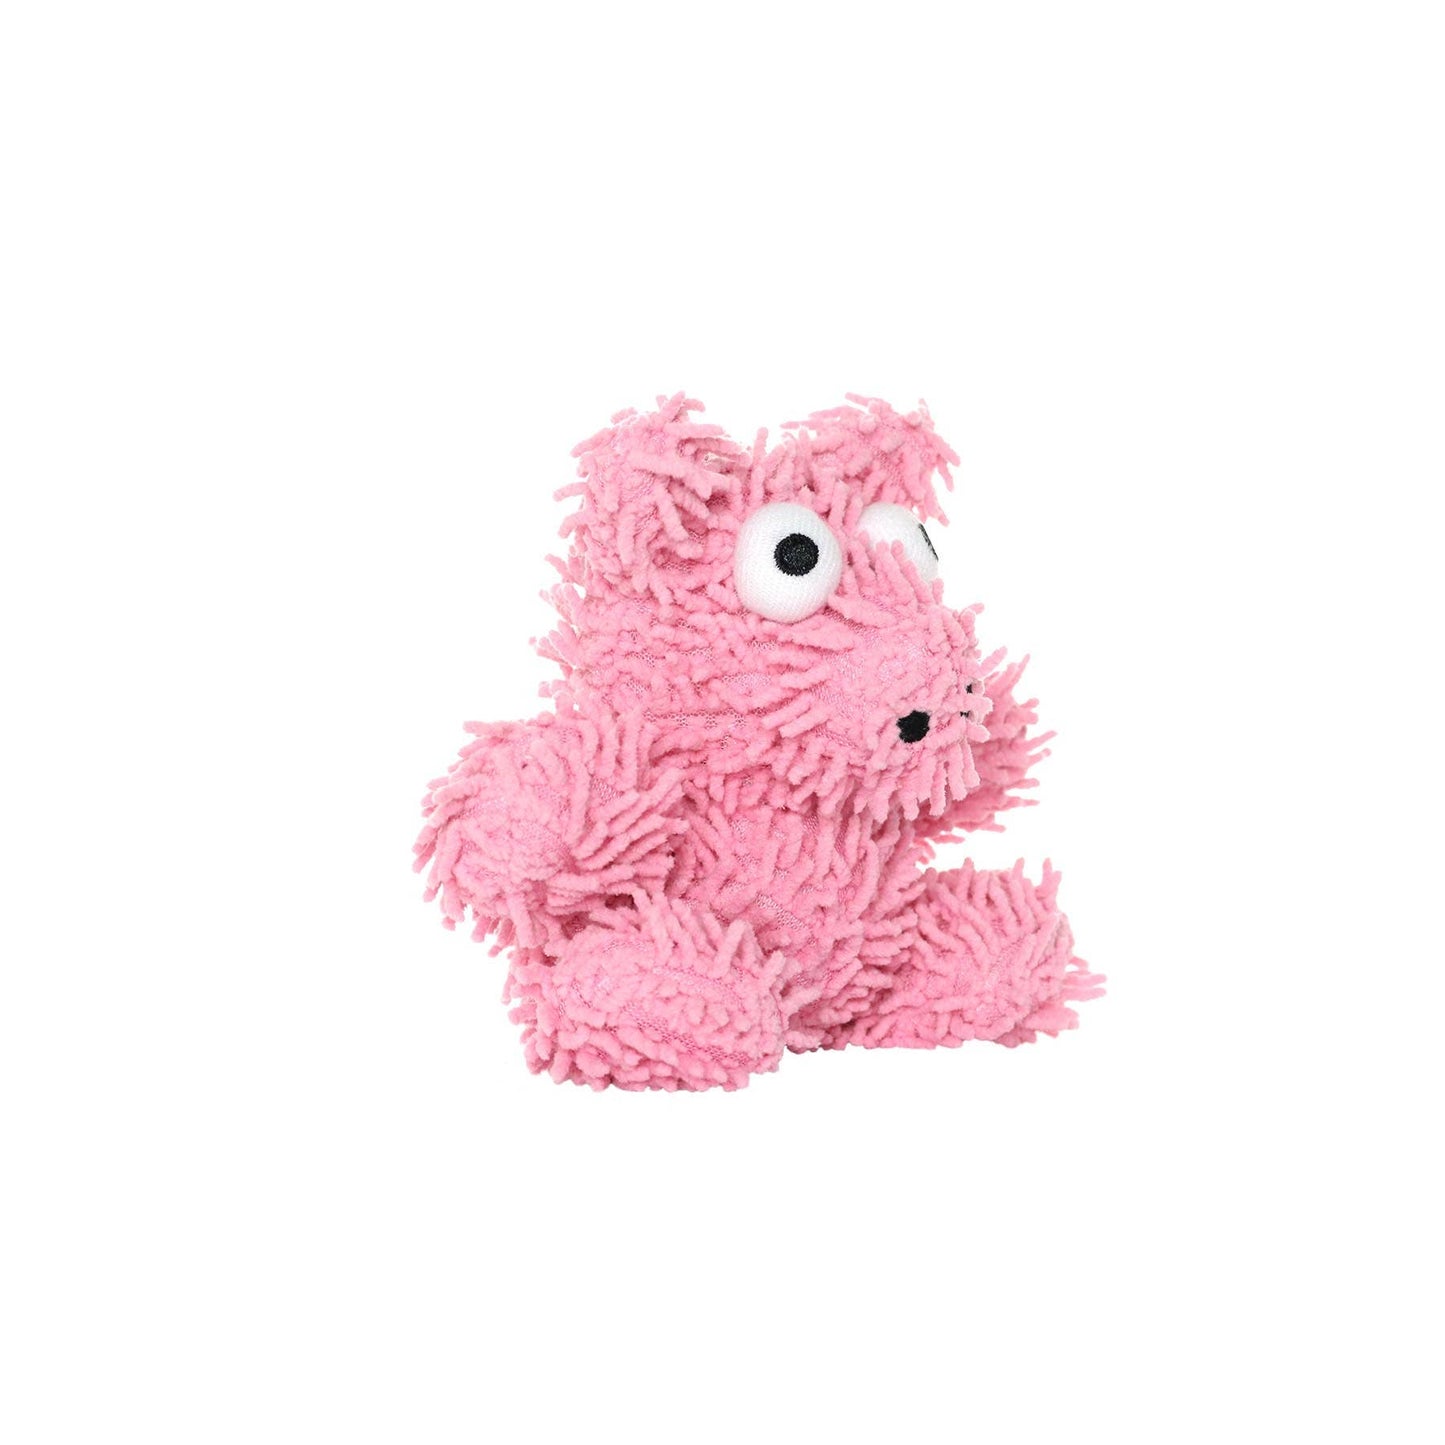 Mighty Jr Microfiber Ball Pig, Durable, Squeaky Dog Toy